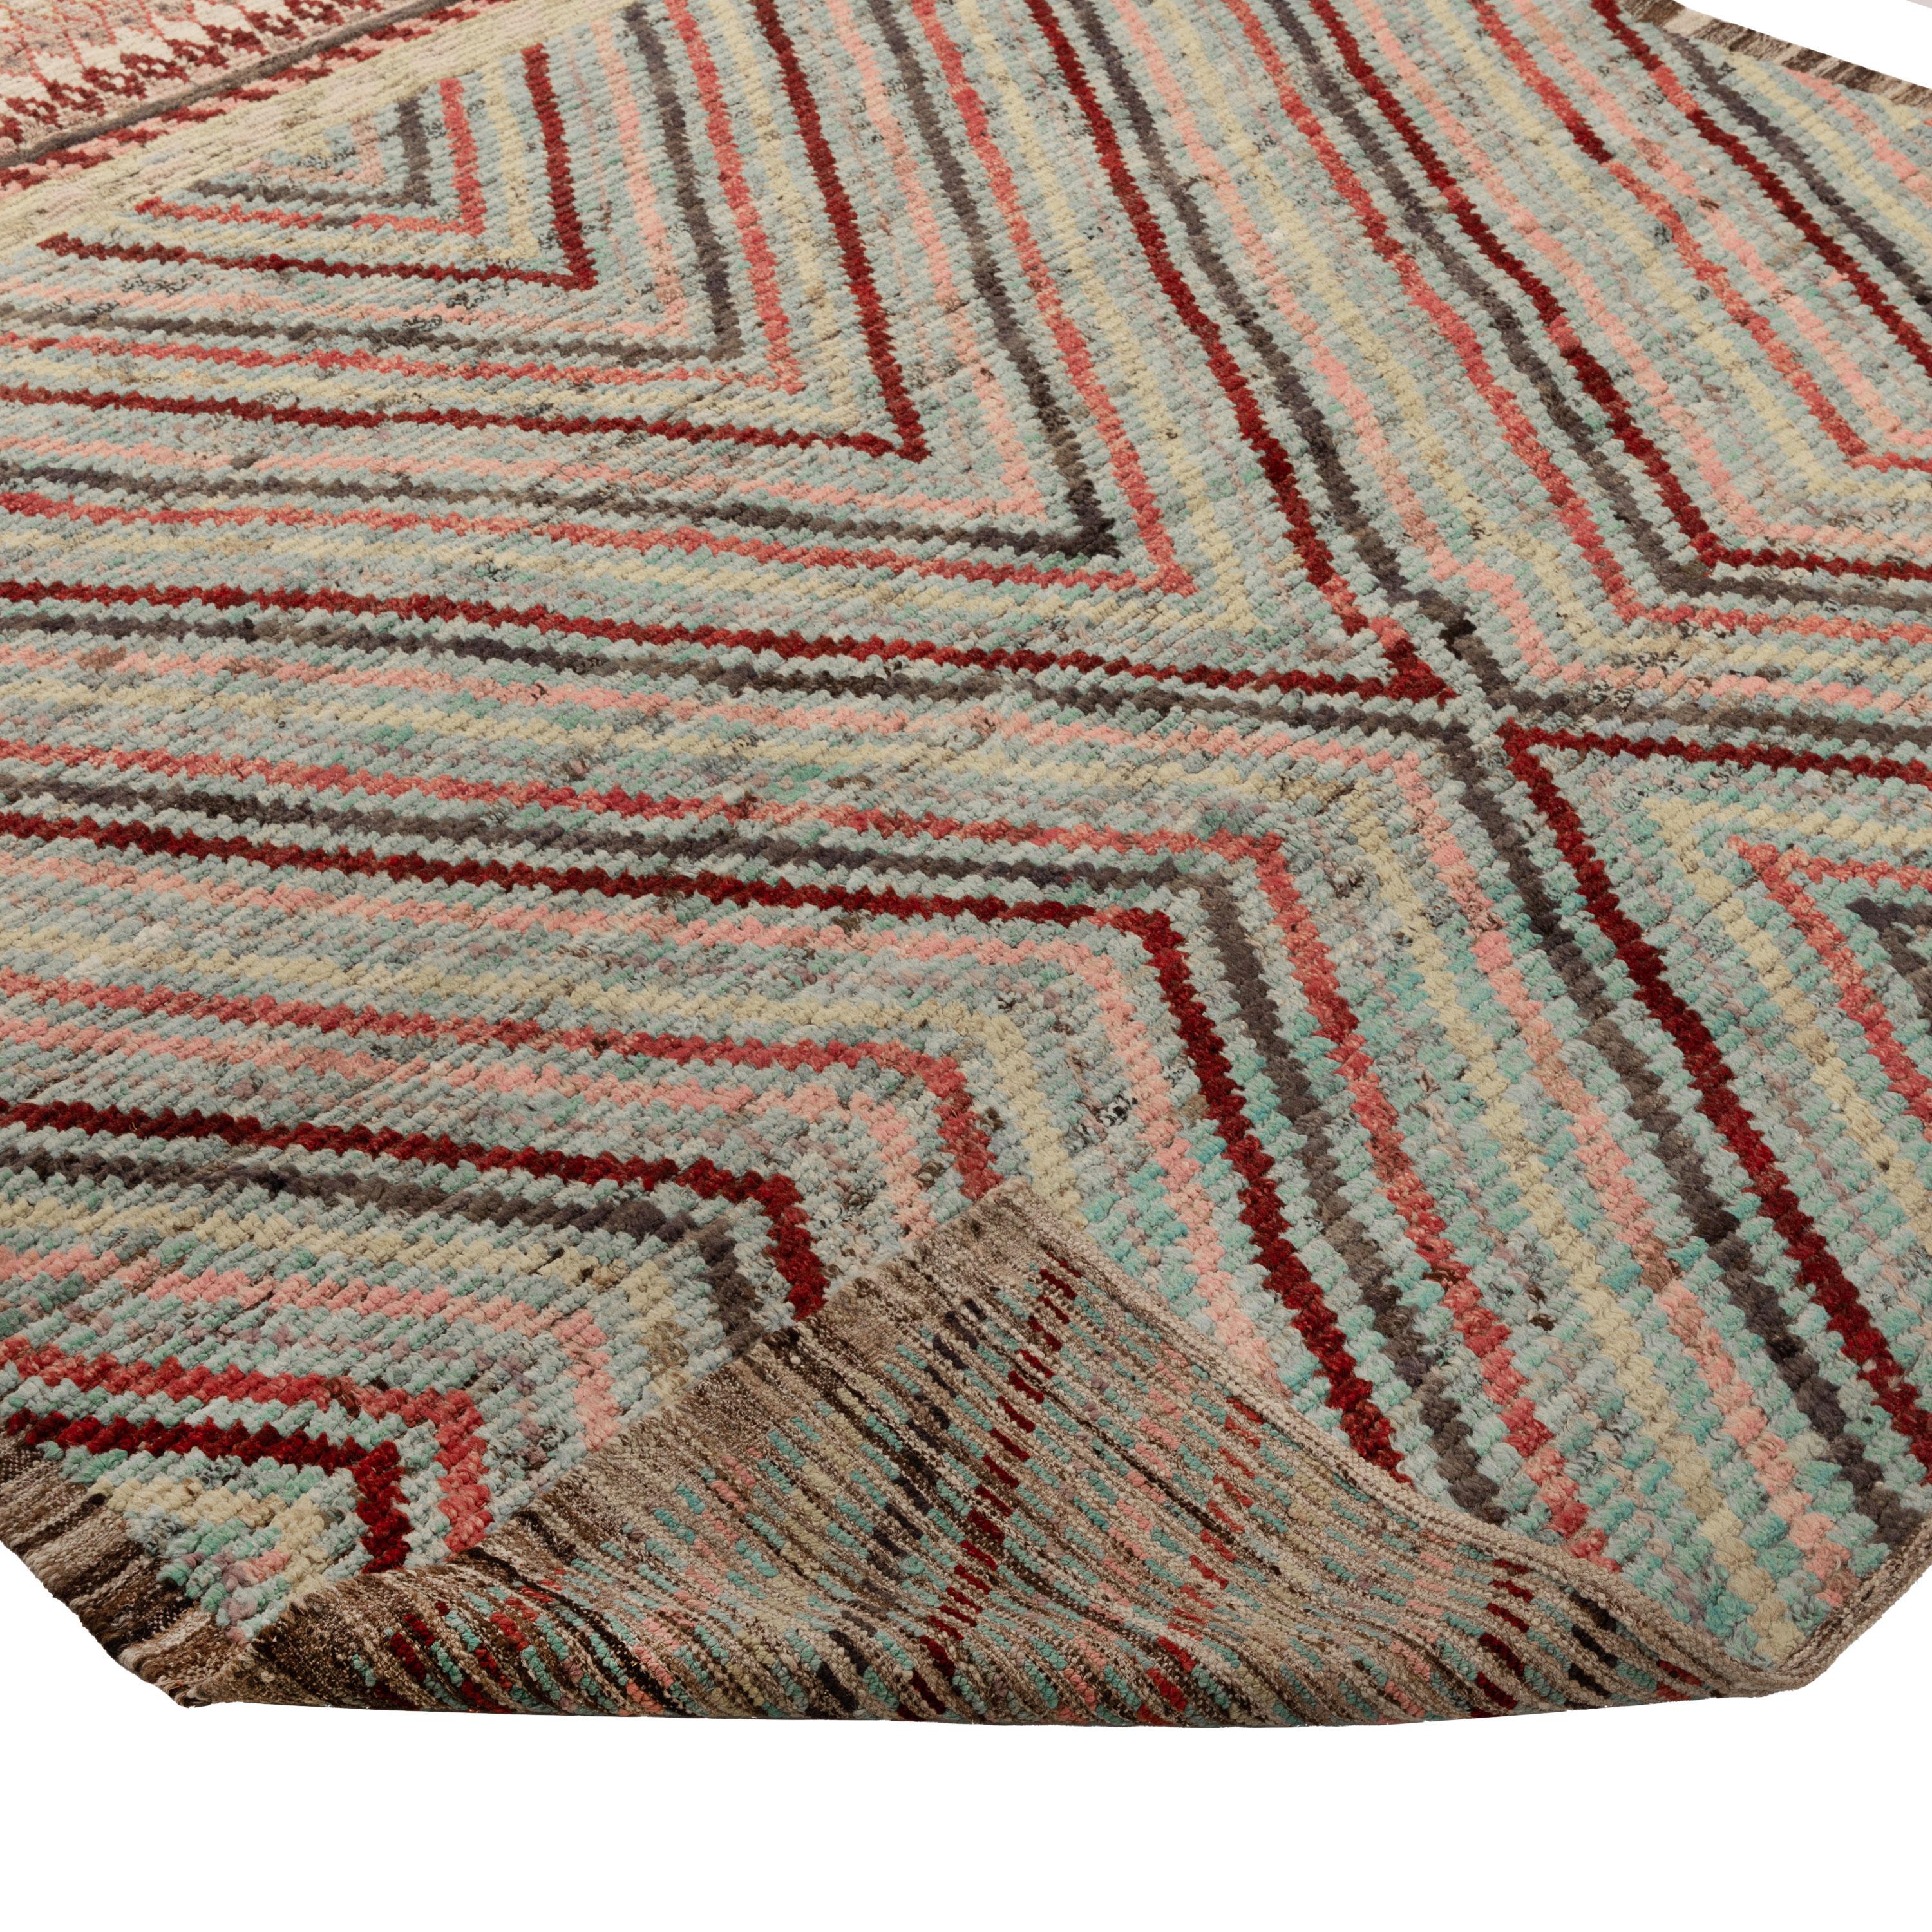 Afghan abc carpet Multicolored Zameen Transitional Wool Rug - 7'2